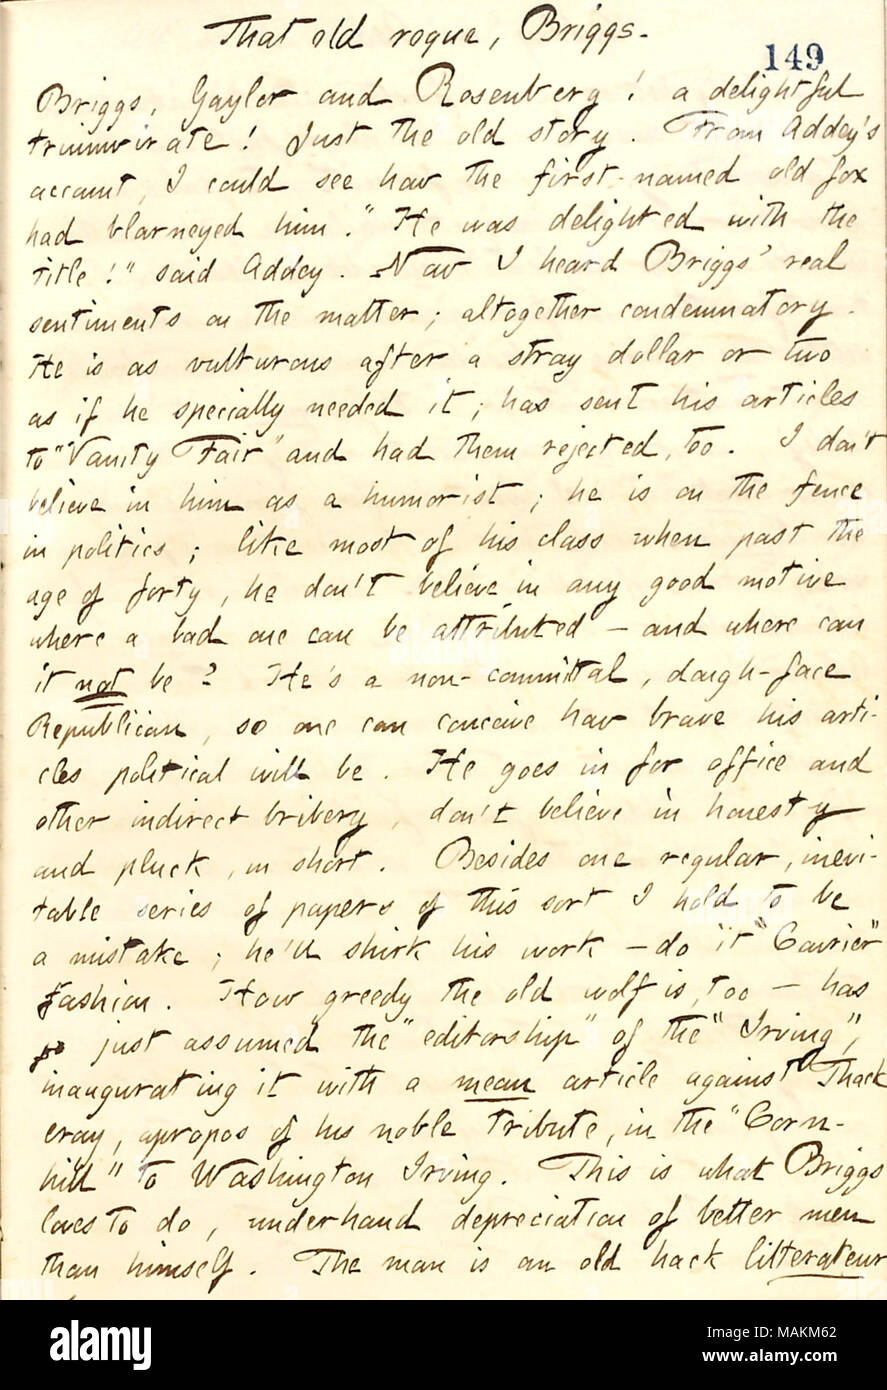 Regarding the personality and writings of Charles Briggs.  Transcription: That old rogue, [Charles] Briggs. Briggs, [Charles] Gayler and Rosenberg! a delightful triumvirate! Just the old story. From [Henry] Addey ?s account, I could see how the first-named old fox had blarneyed him. ?ǣHe was delighted with the title! ? said Addey. Now I heard Briggs ? real sentiments on the matter; altogether condemnatory. He is as vulturous after a stray dollar or two as if he specially needed it; has sent his articles to ?ǣVanity Fair ? and had them rejected, too. I don ?t believe in him as a humorist; he is Stock Photo